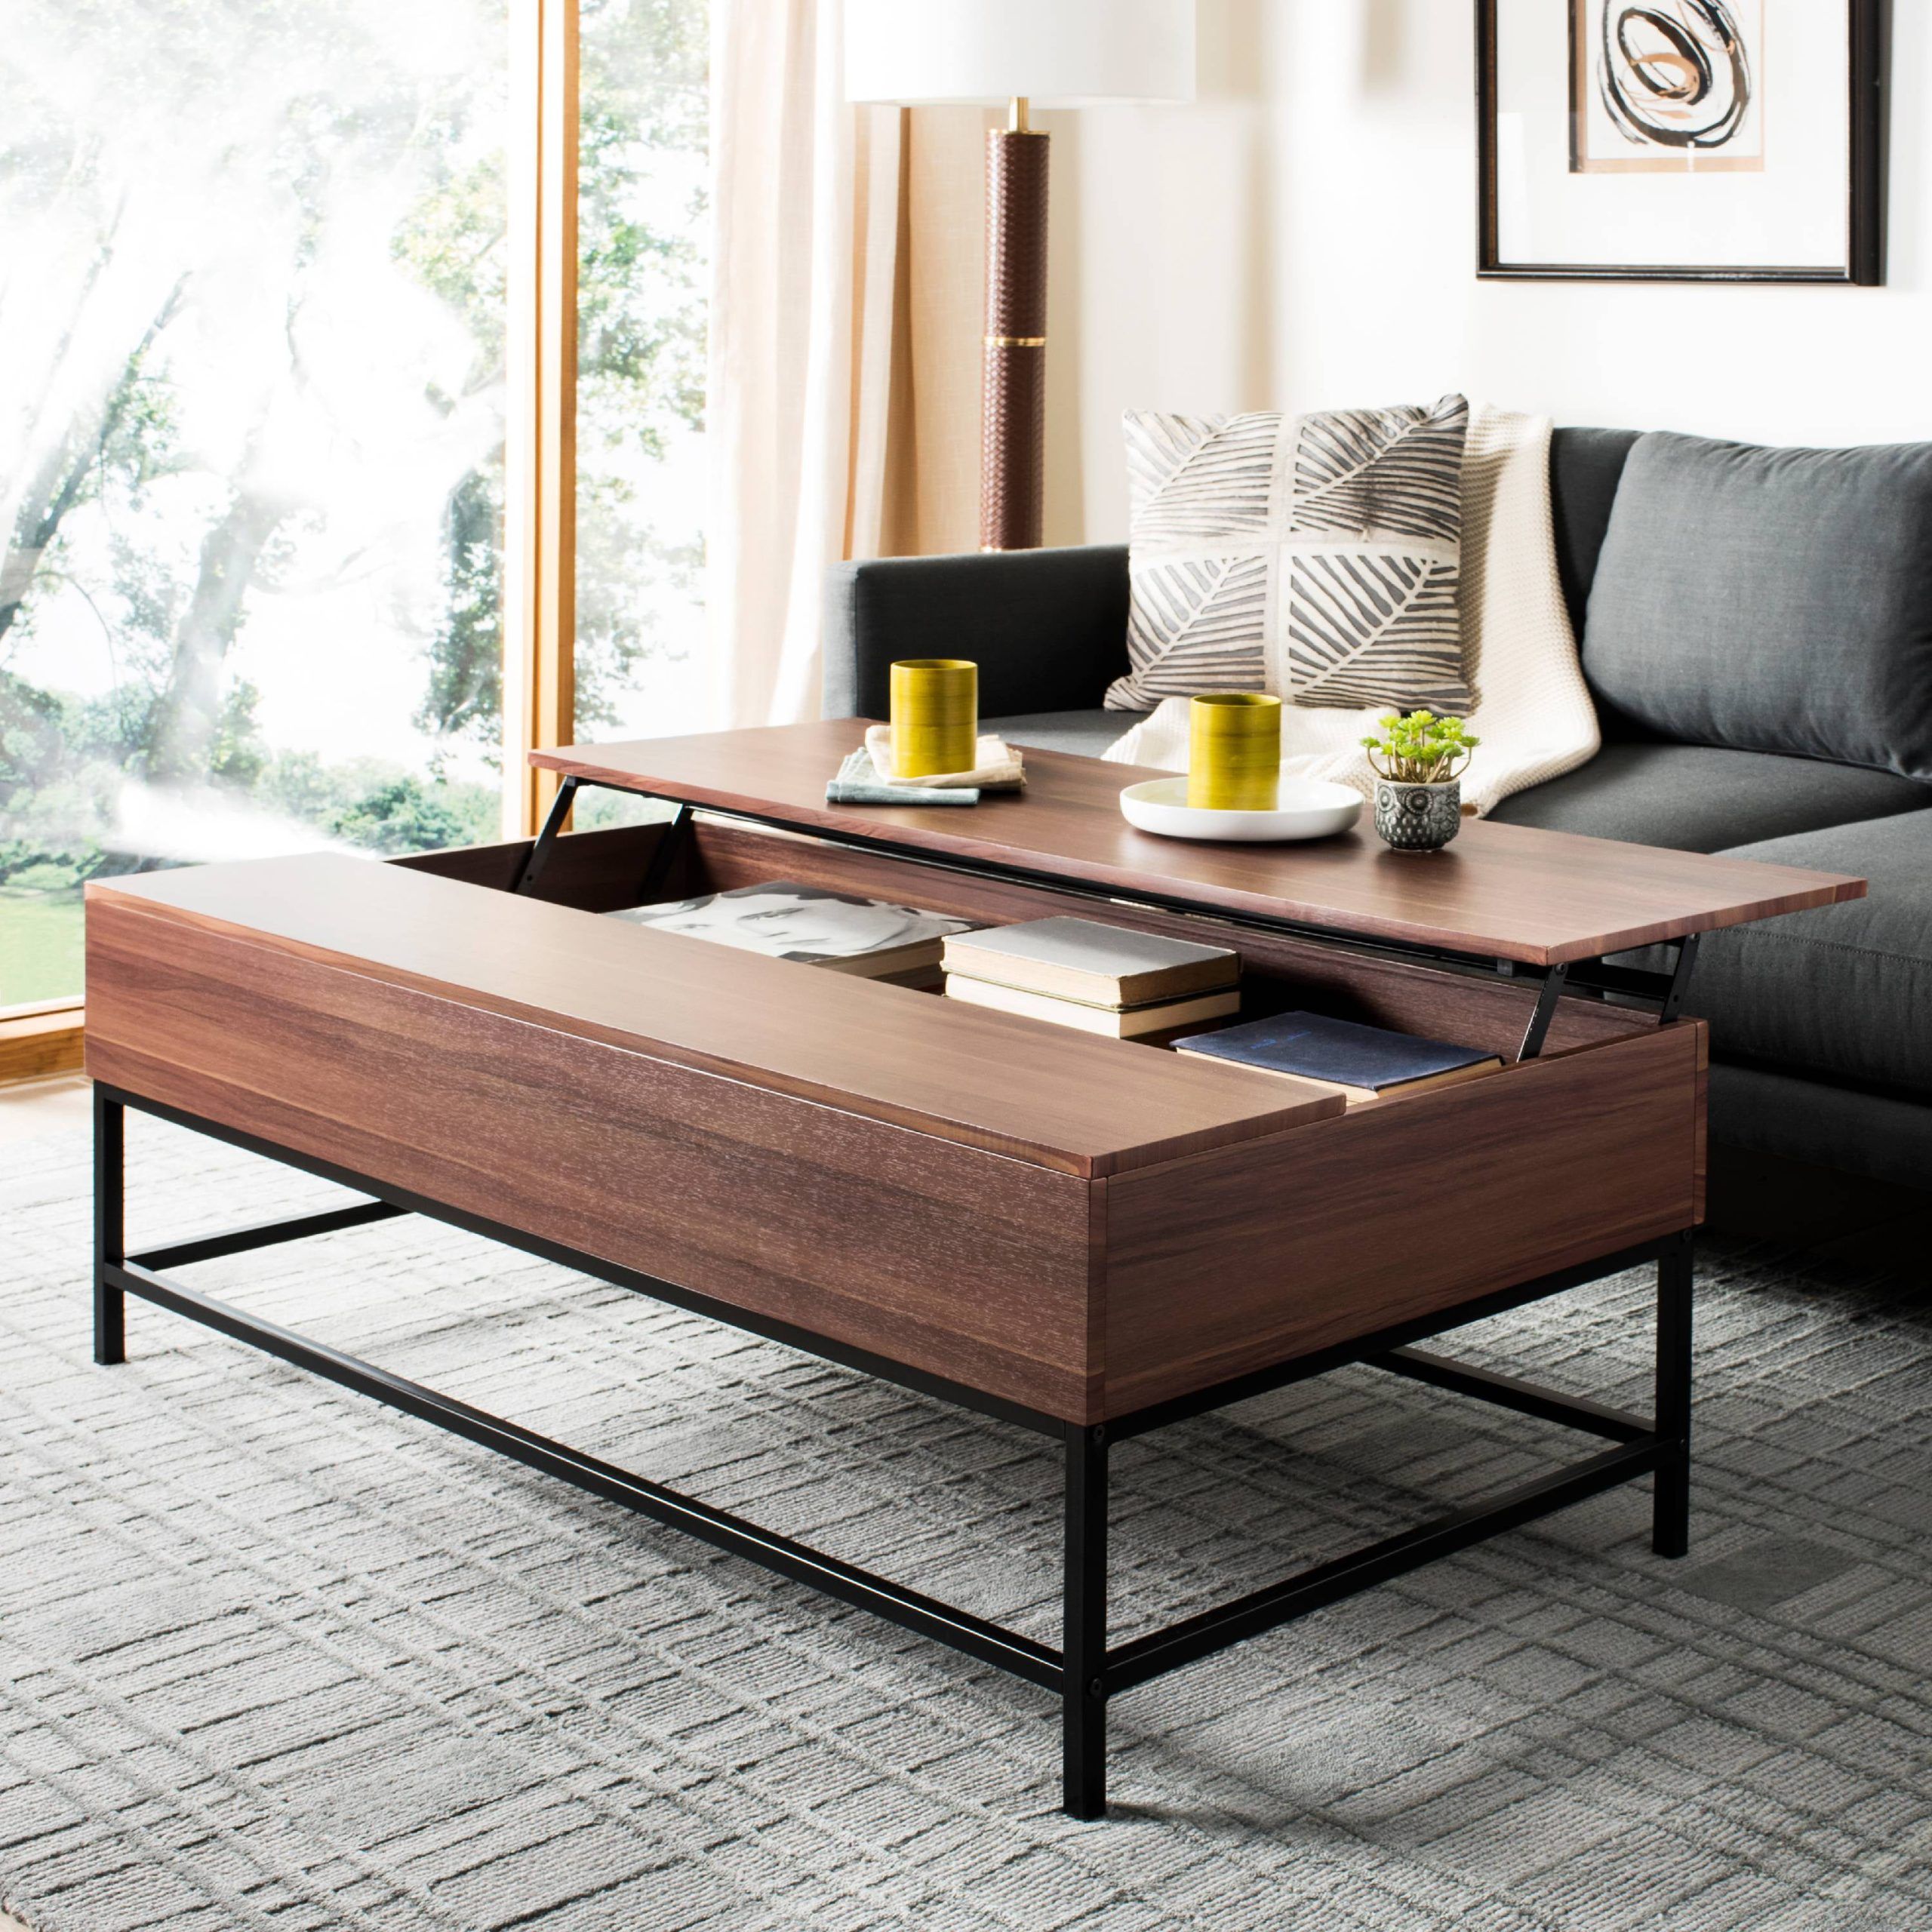 Modern Wooden Lift Top Tables For Most Recently Released Safavieh Gina Contemporary Lift Top Coffee Table With Storage – Walmart (View 10 of 15)